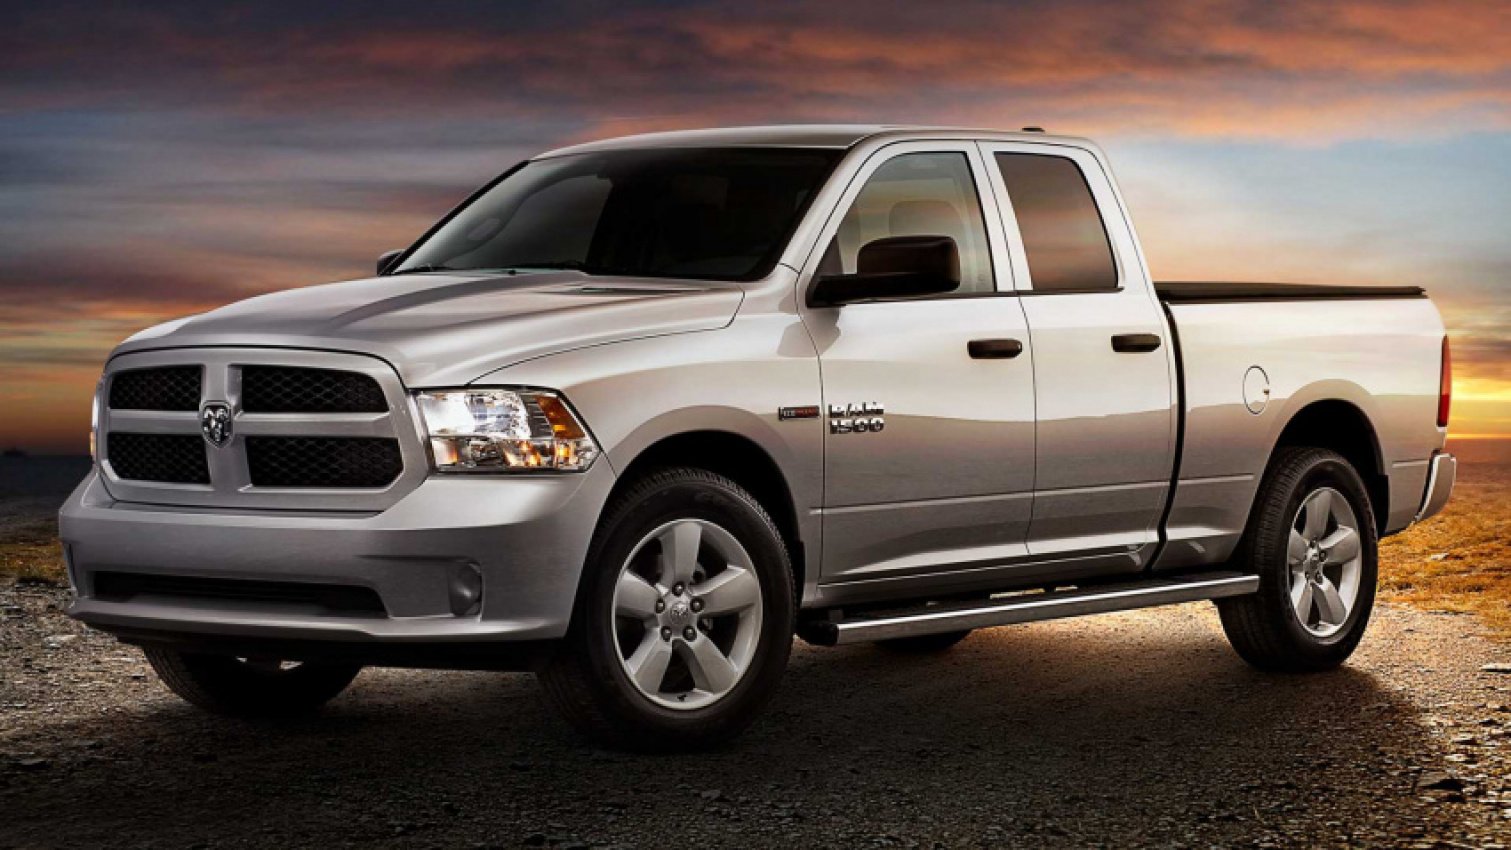 autos, cars, ram, ram 1500 owner must pay $15,000 for engine replacement after missing oil change